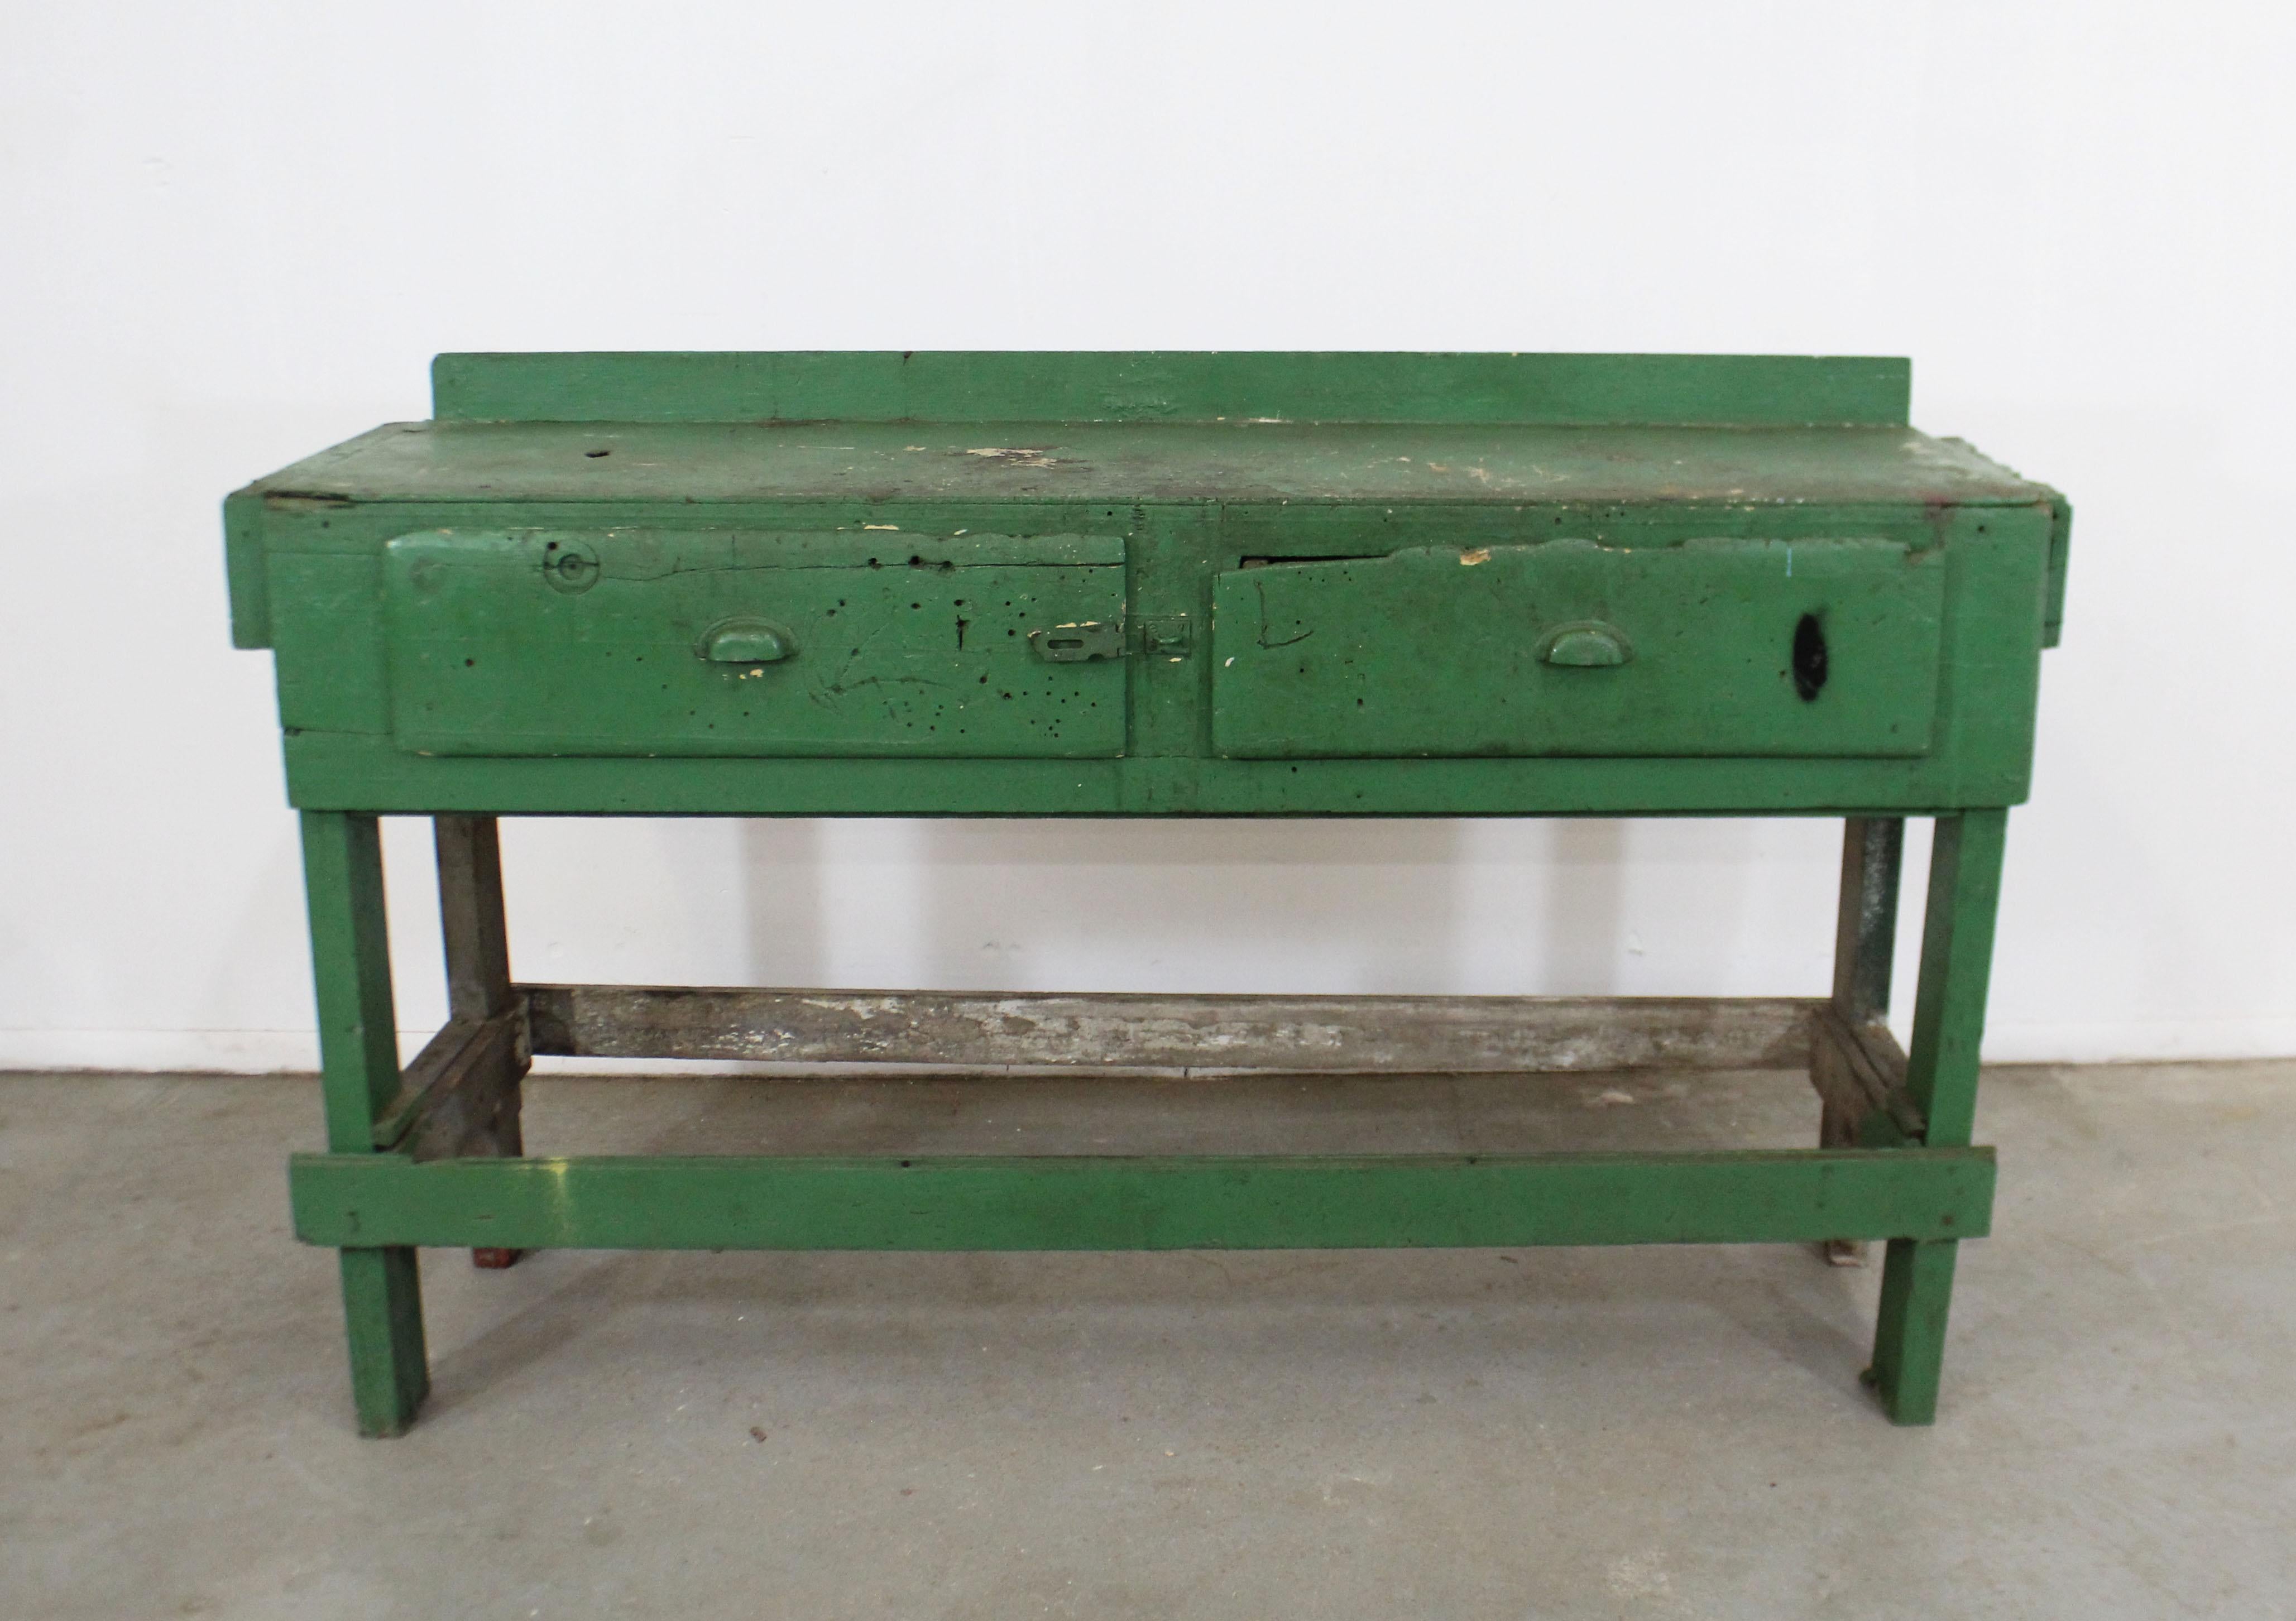 Offered is vintage/antique industrial/rustic style workbench, circa 1930s. Has two drawers with painted metal pulls, some miscellaneous hardware. This piece has a rustic look with obvious signs of age wear throughout (stains, chips, scratches,